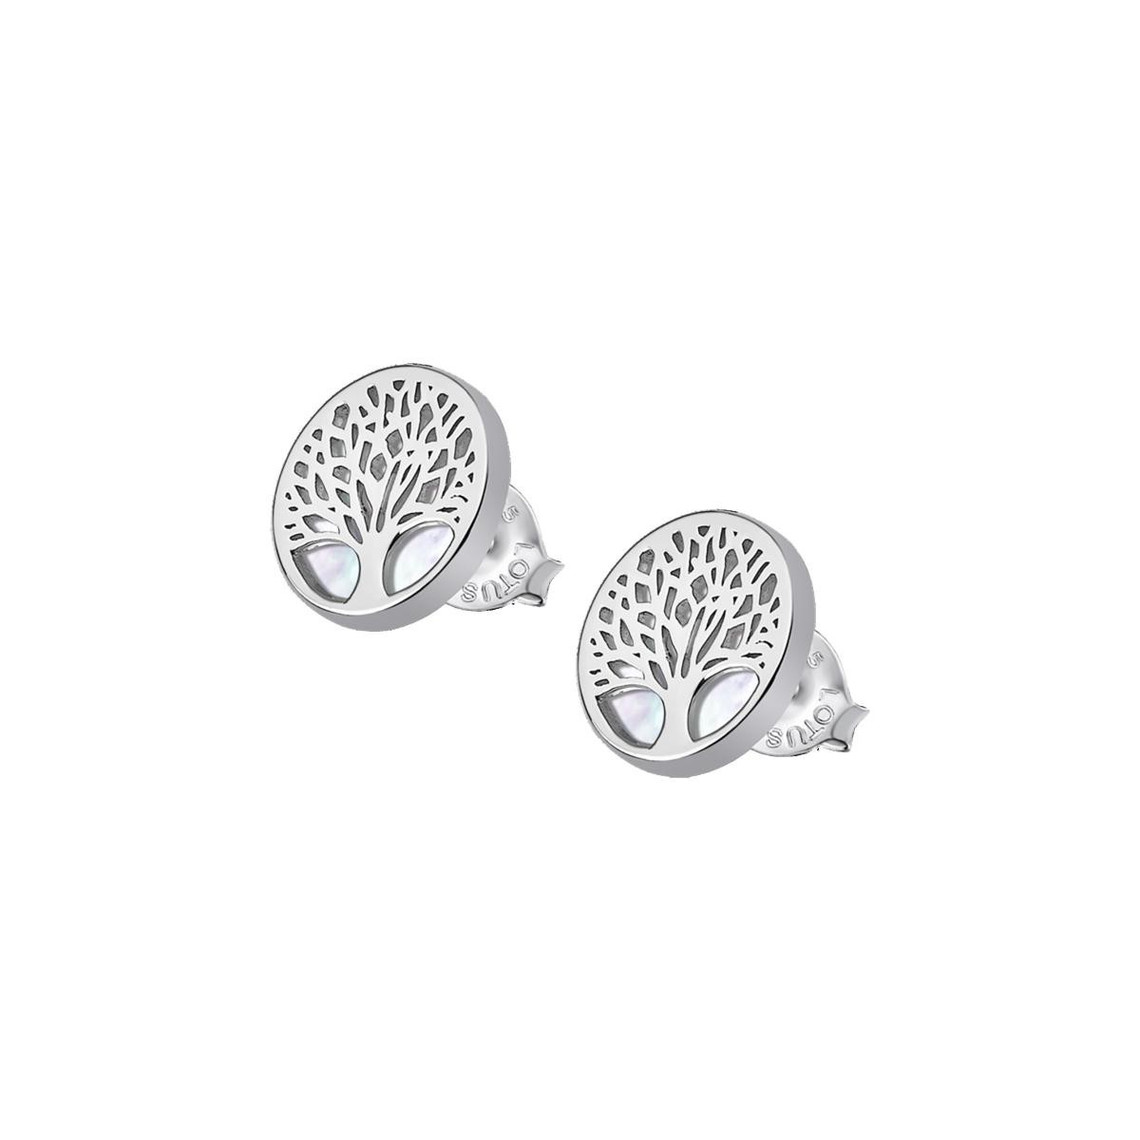 Boucles d'oreilles Lotus Silver TREE OF LIFE LP1678-4-1 - Boucles d'oreilles TREE OF LIFE Argent Lot